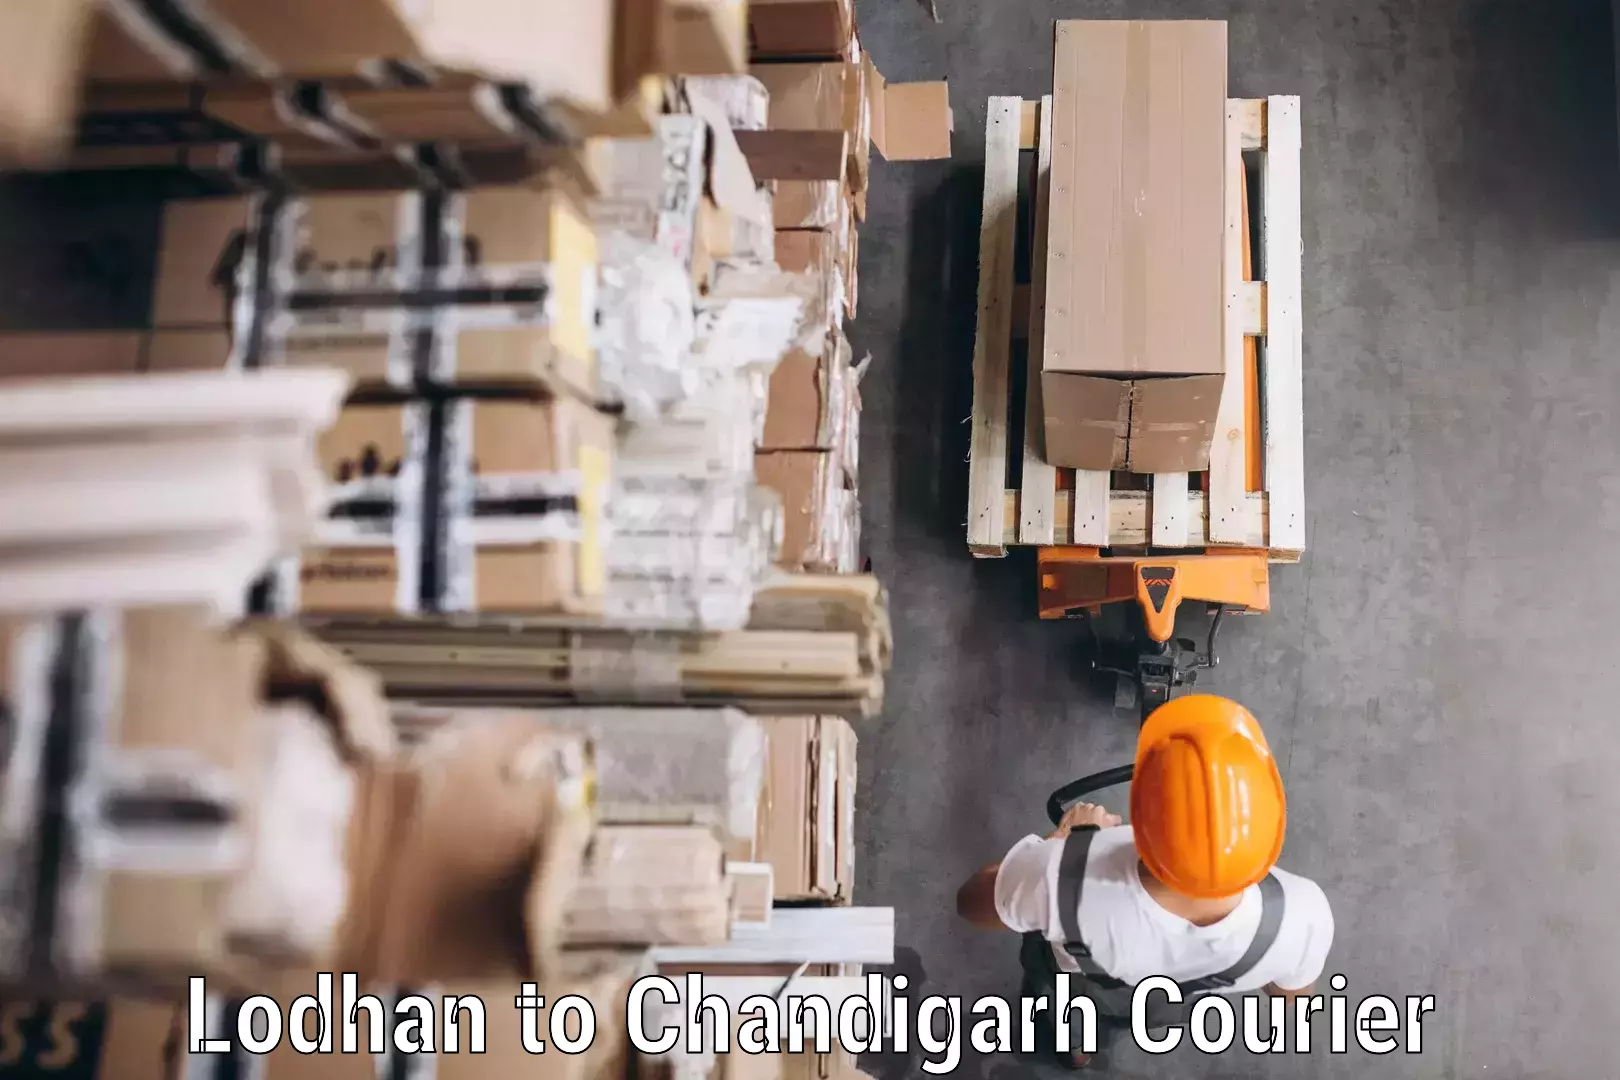 Courier service comparison Lodhan to Chandigarh